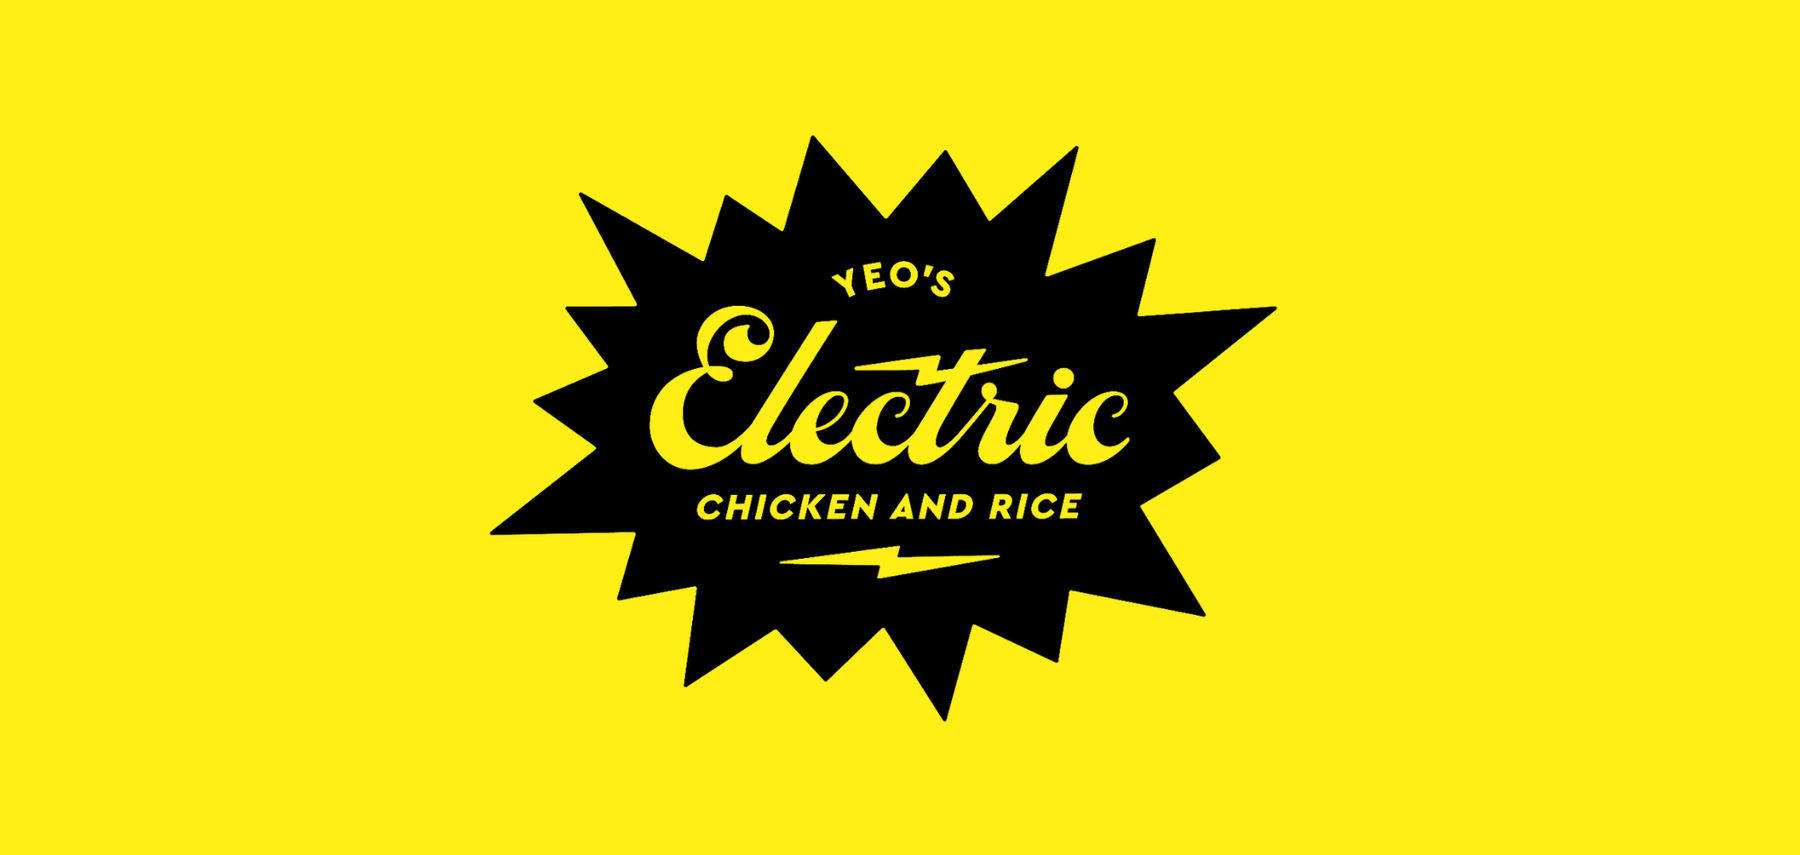 Yeo's Electric Chicken and Rice | Downtown San Francisco